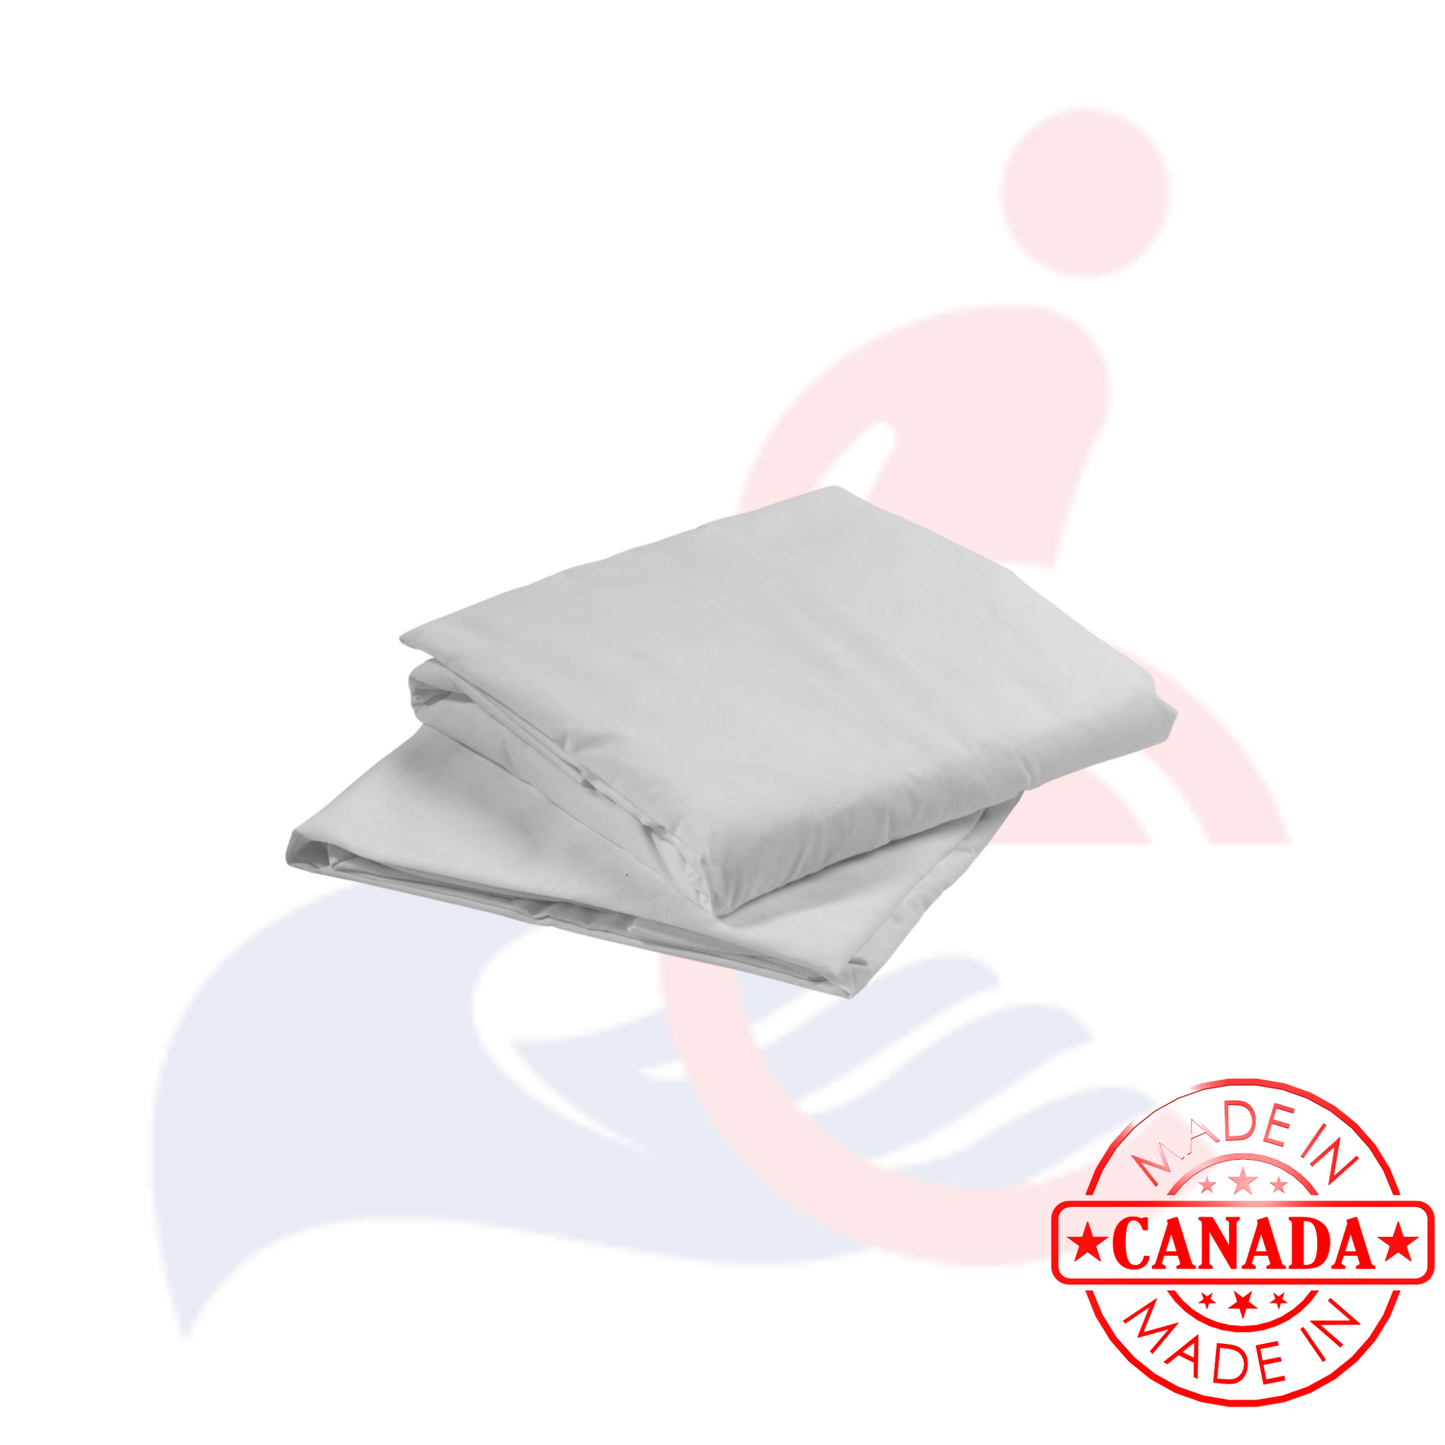 PRO AIDE MEDIC® Fitted Bed Sheets for Hospital Beds